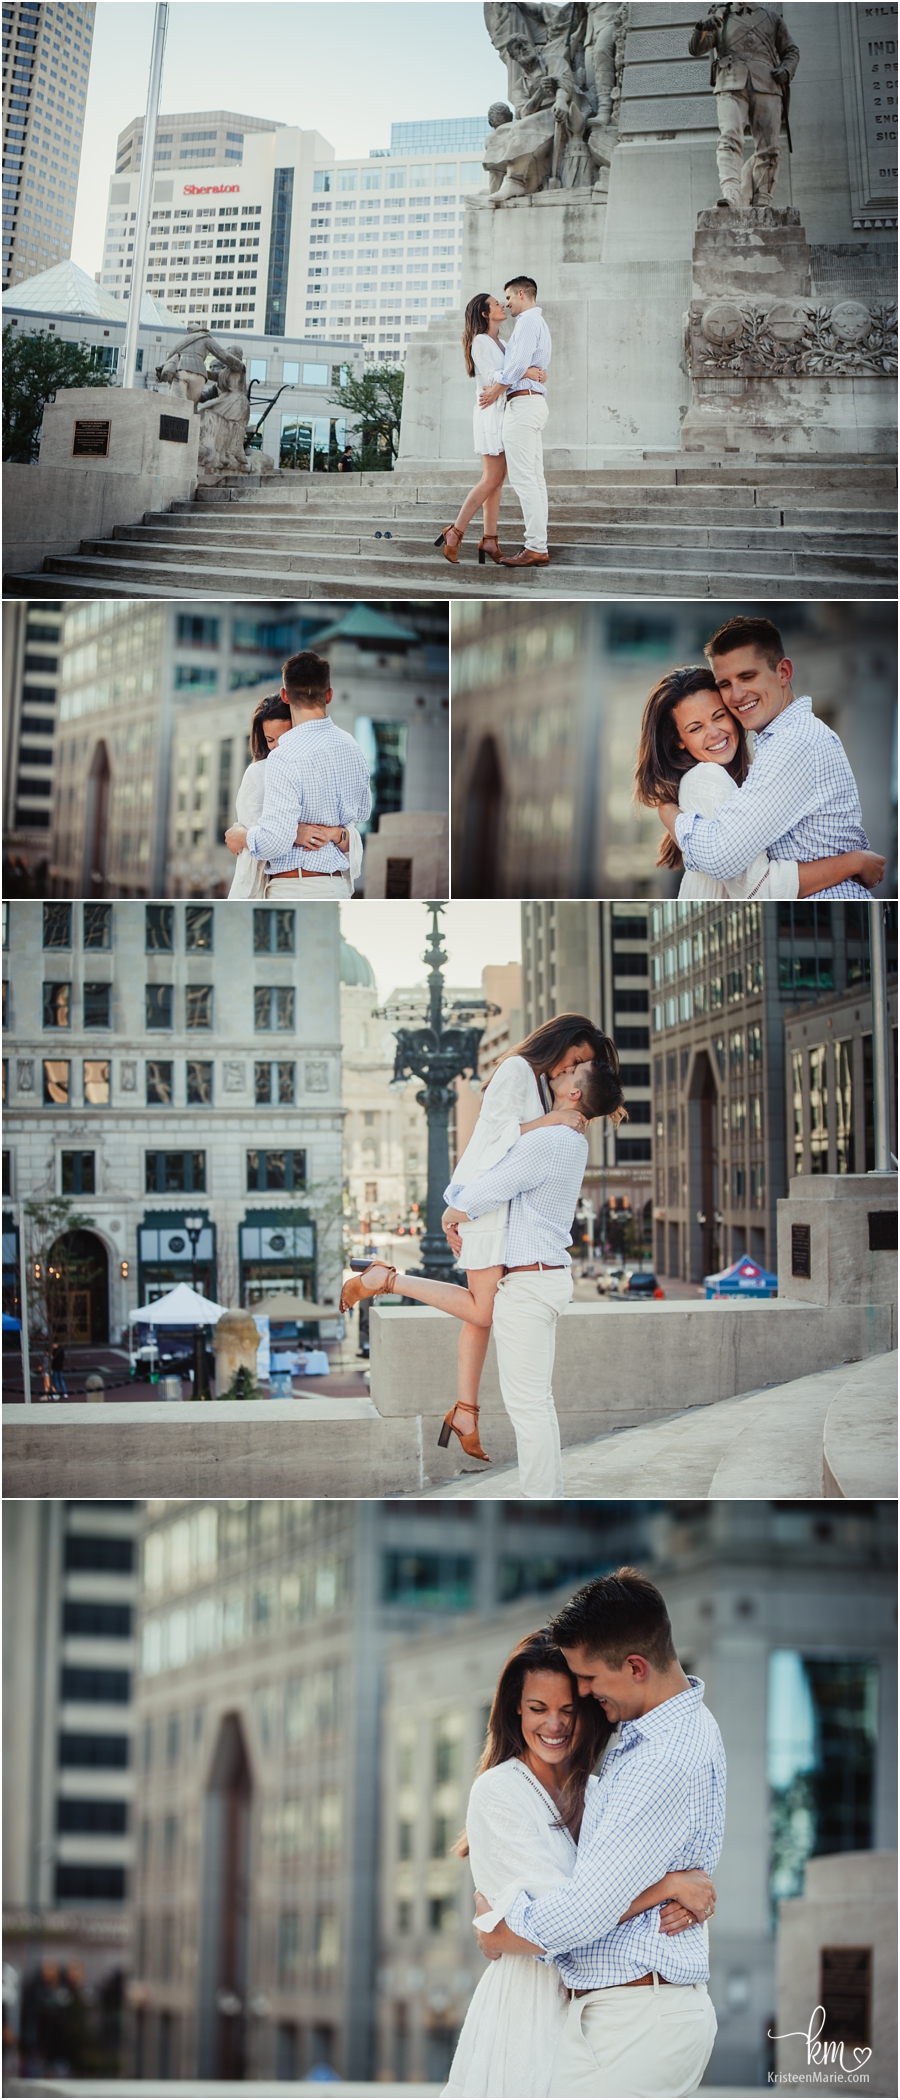 so much emotion - Indy engagement photography